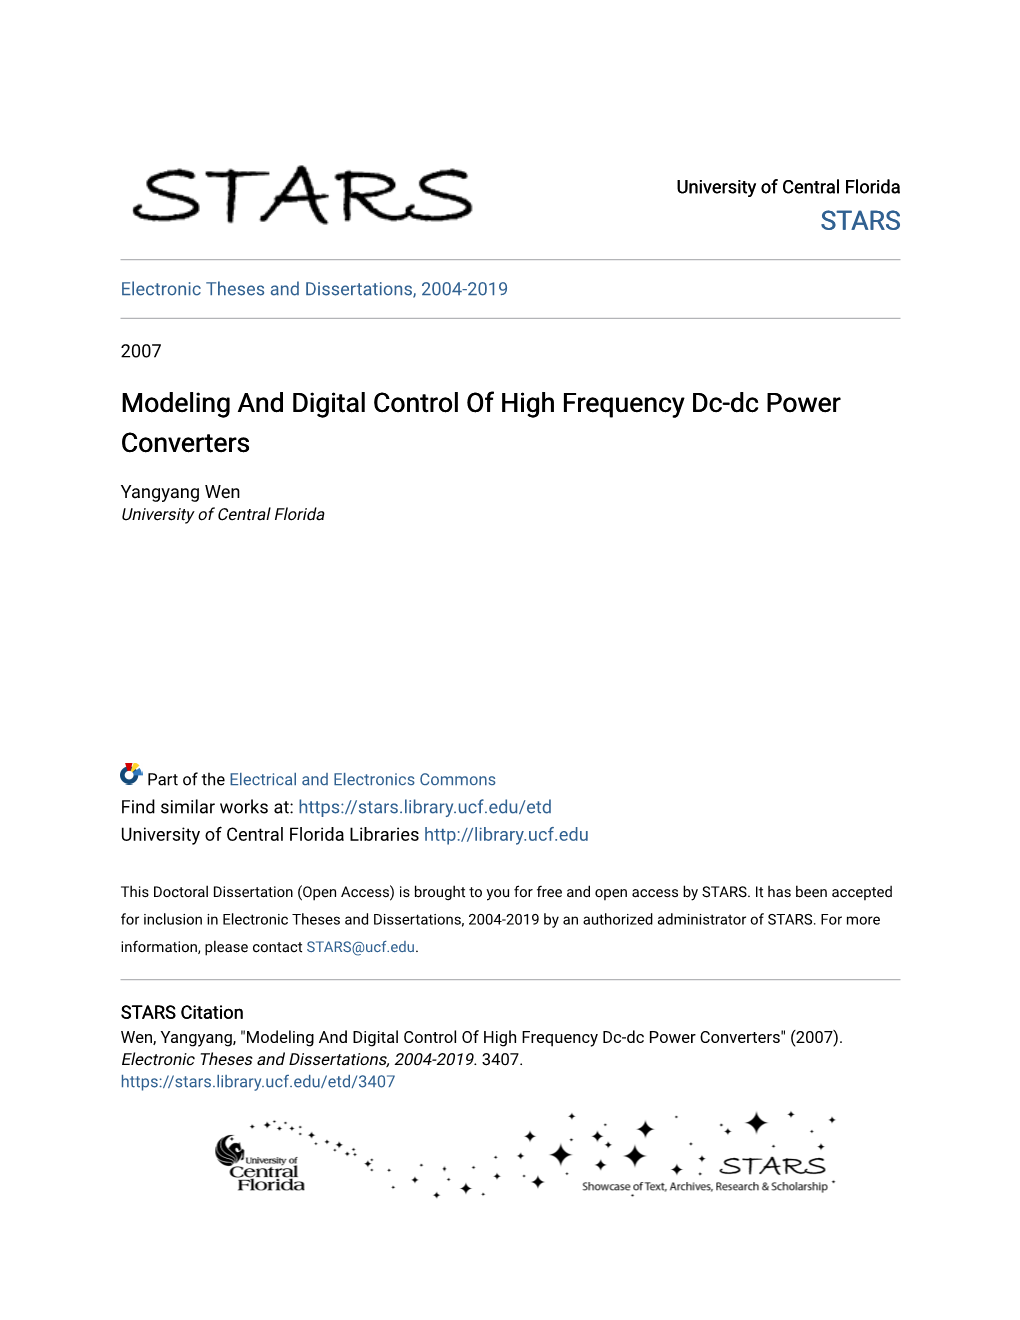 Modeling and Digital Control of High Frequency Dc-Dc Power Converters